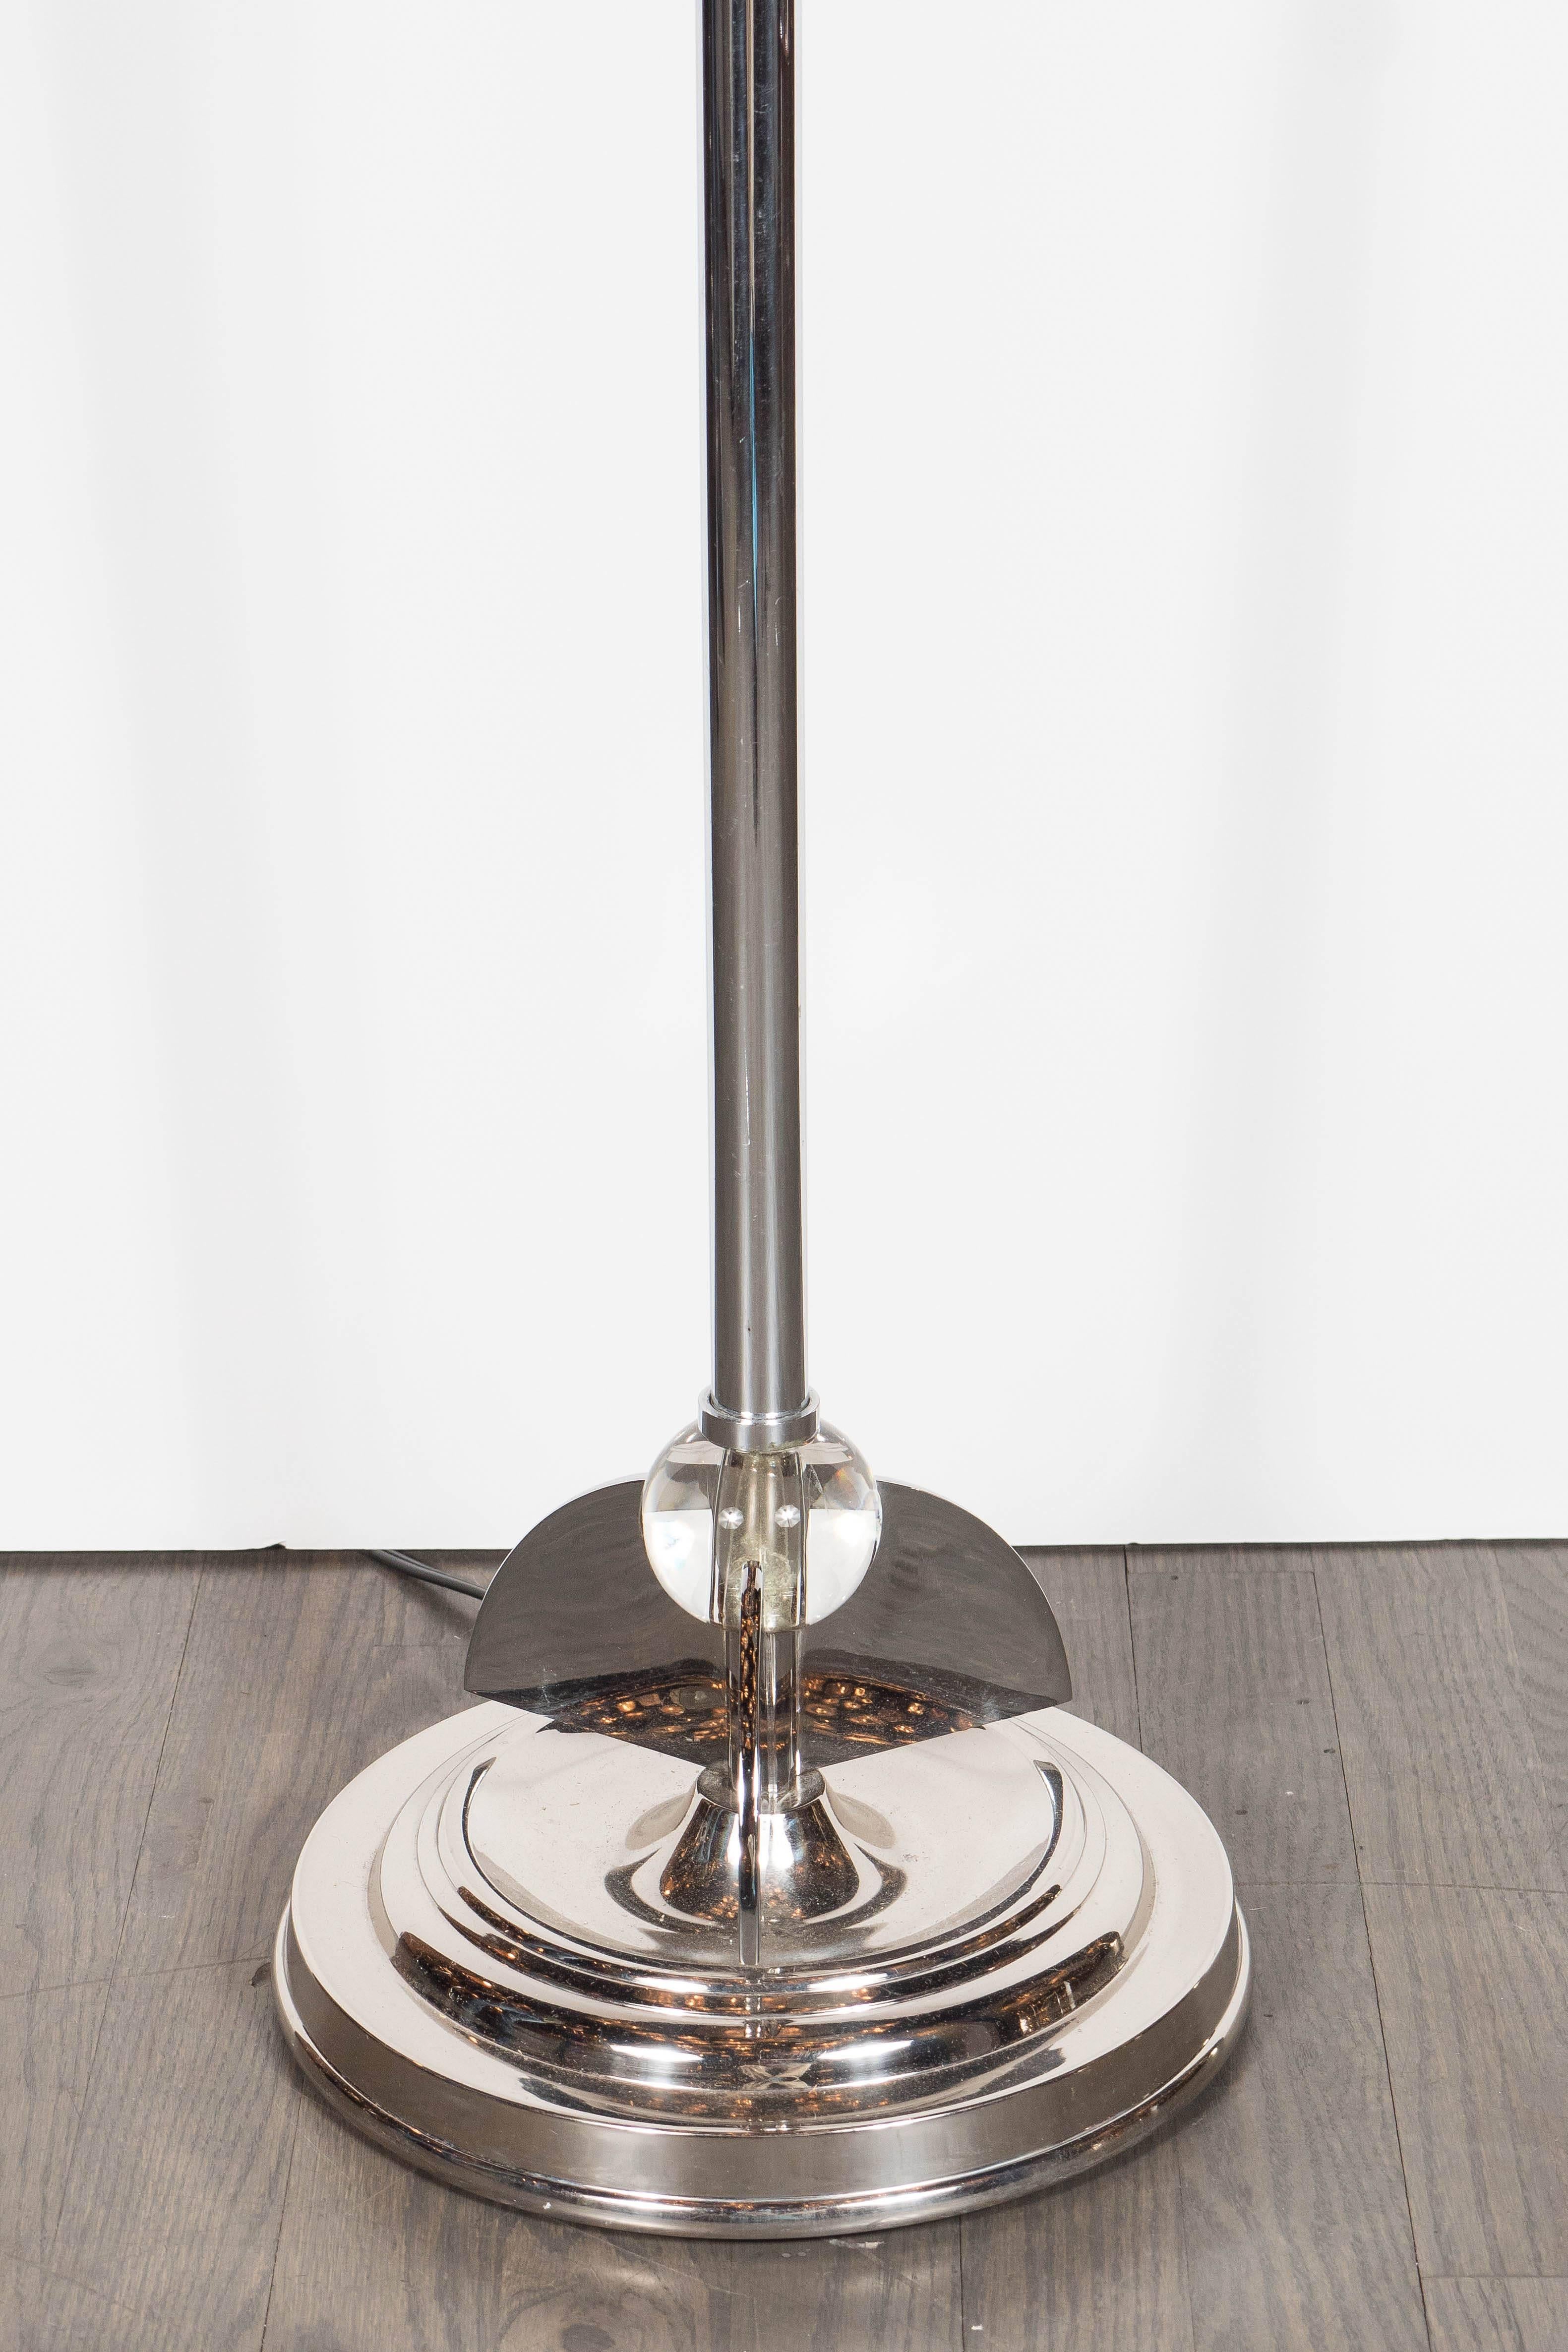 This stunning Machine Age Art Deco chrome floor lamp was realized in the United States, circa 1935. It features a chrome height adjustable design with skyscraper style and glass ball detailing. The adjustable original lampshade comprises of tiles of